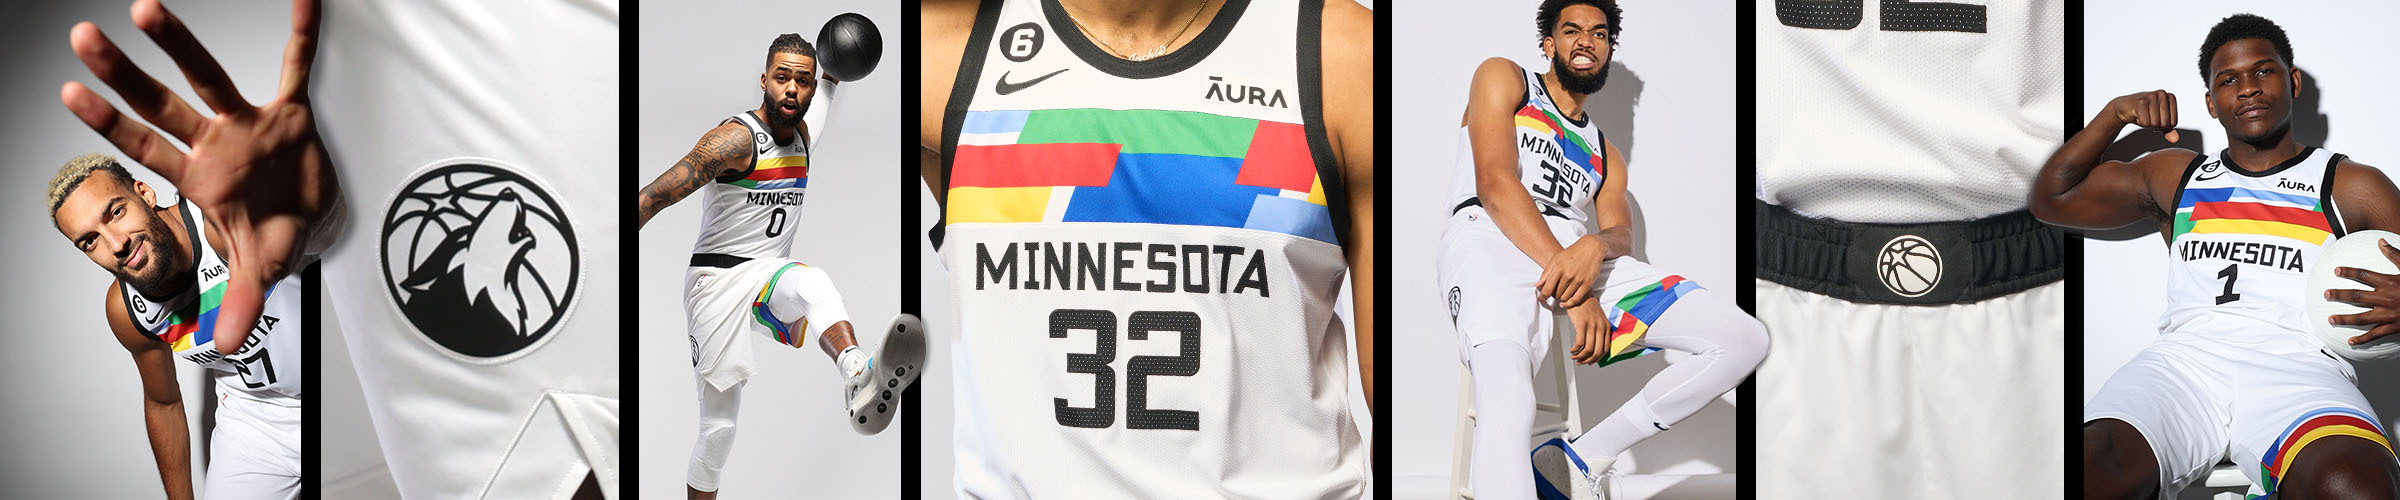 NBA Jerseys: Timberwolves Release New City Edition Uniform and